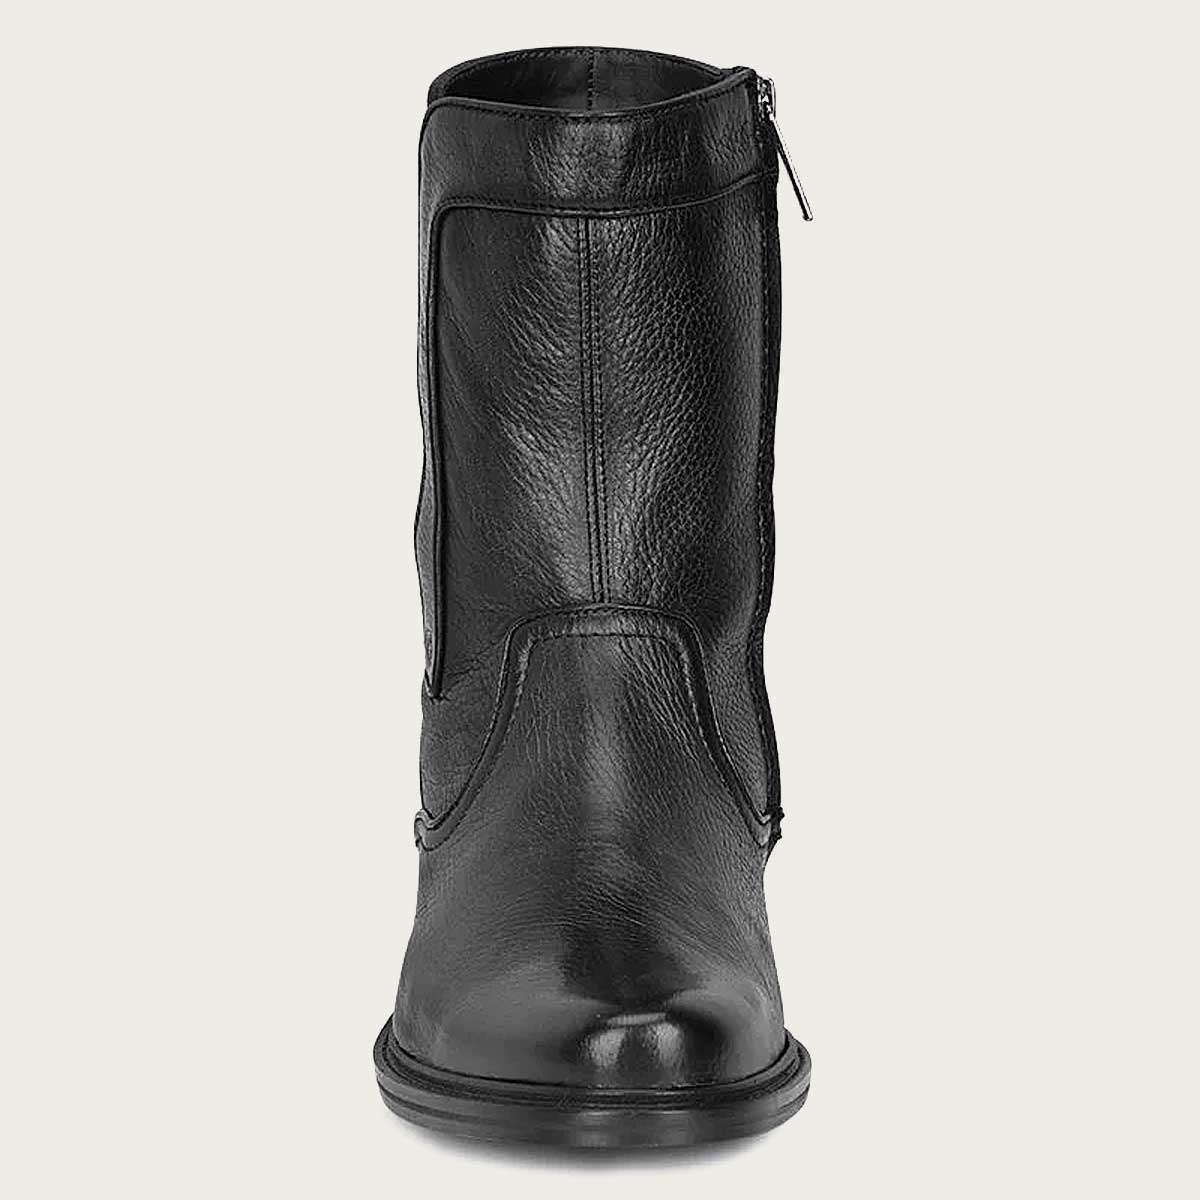 black hand-painted leather dress boot